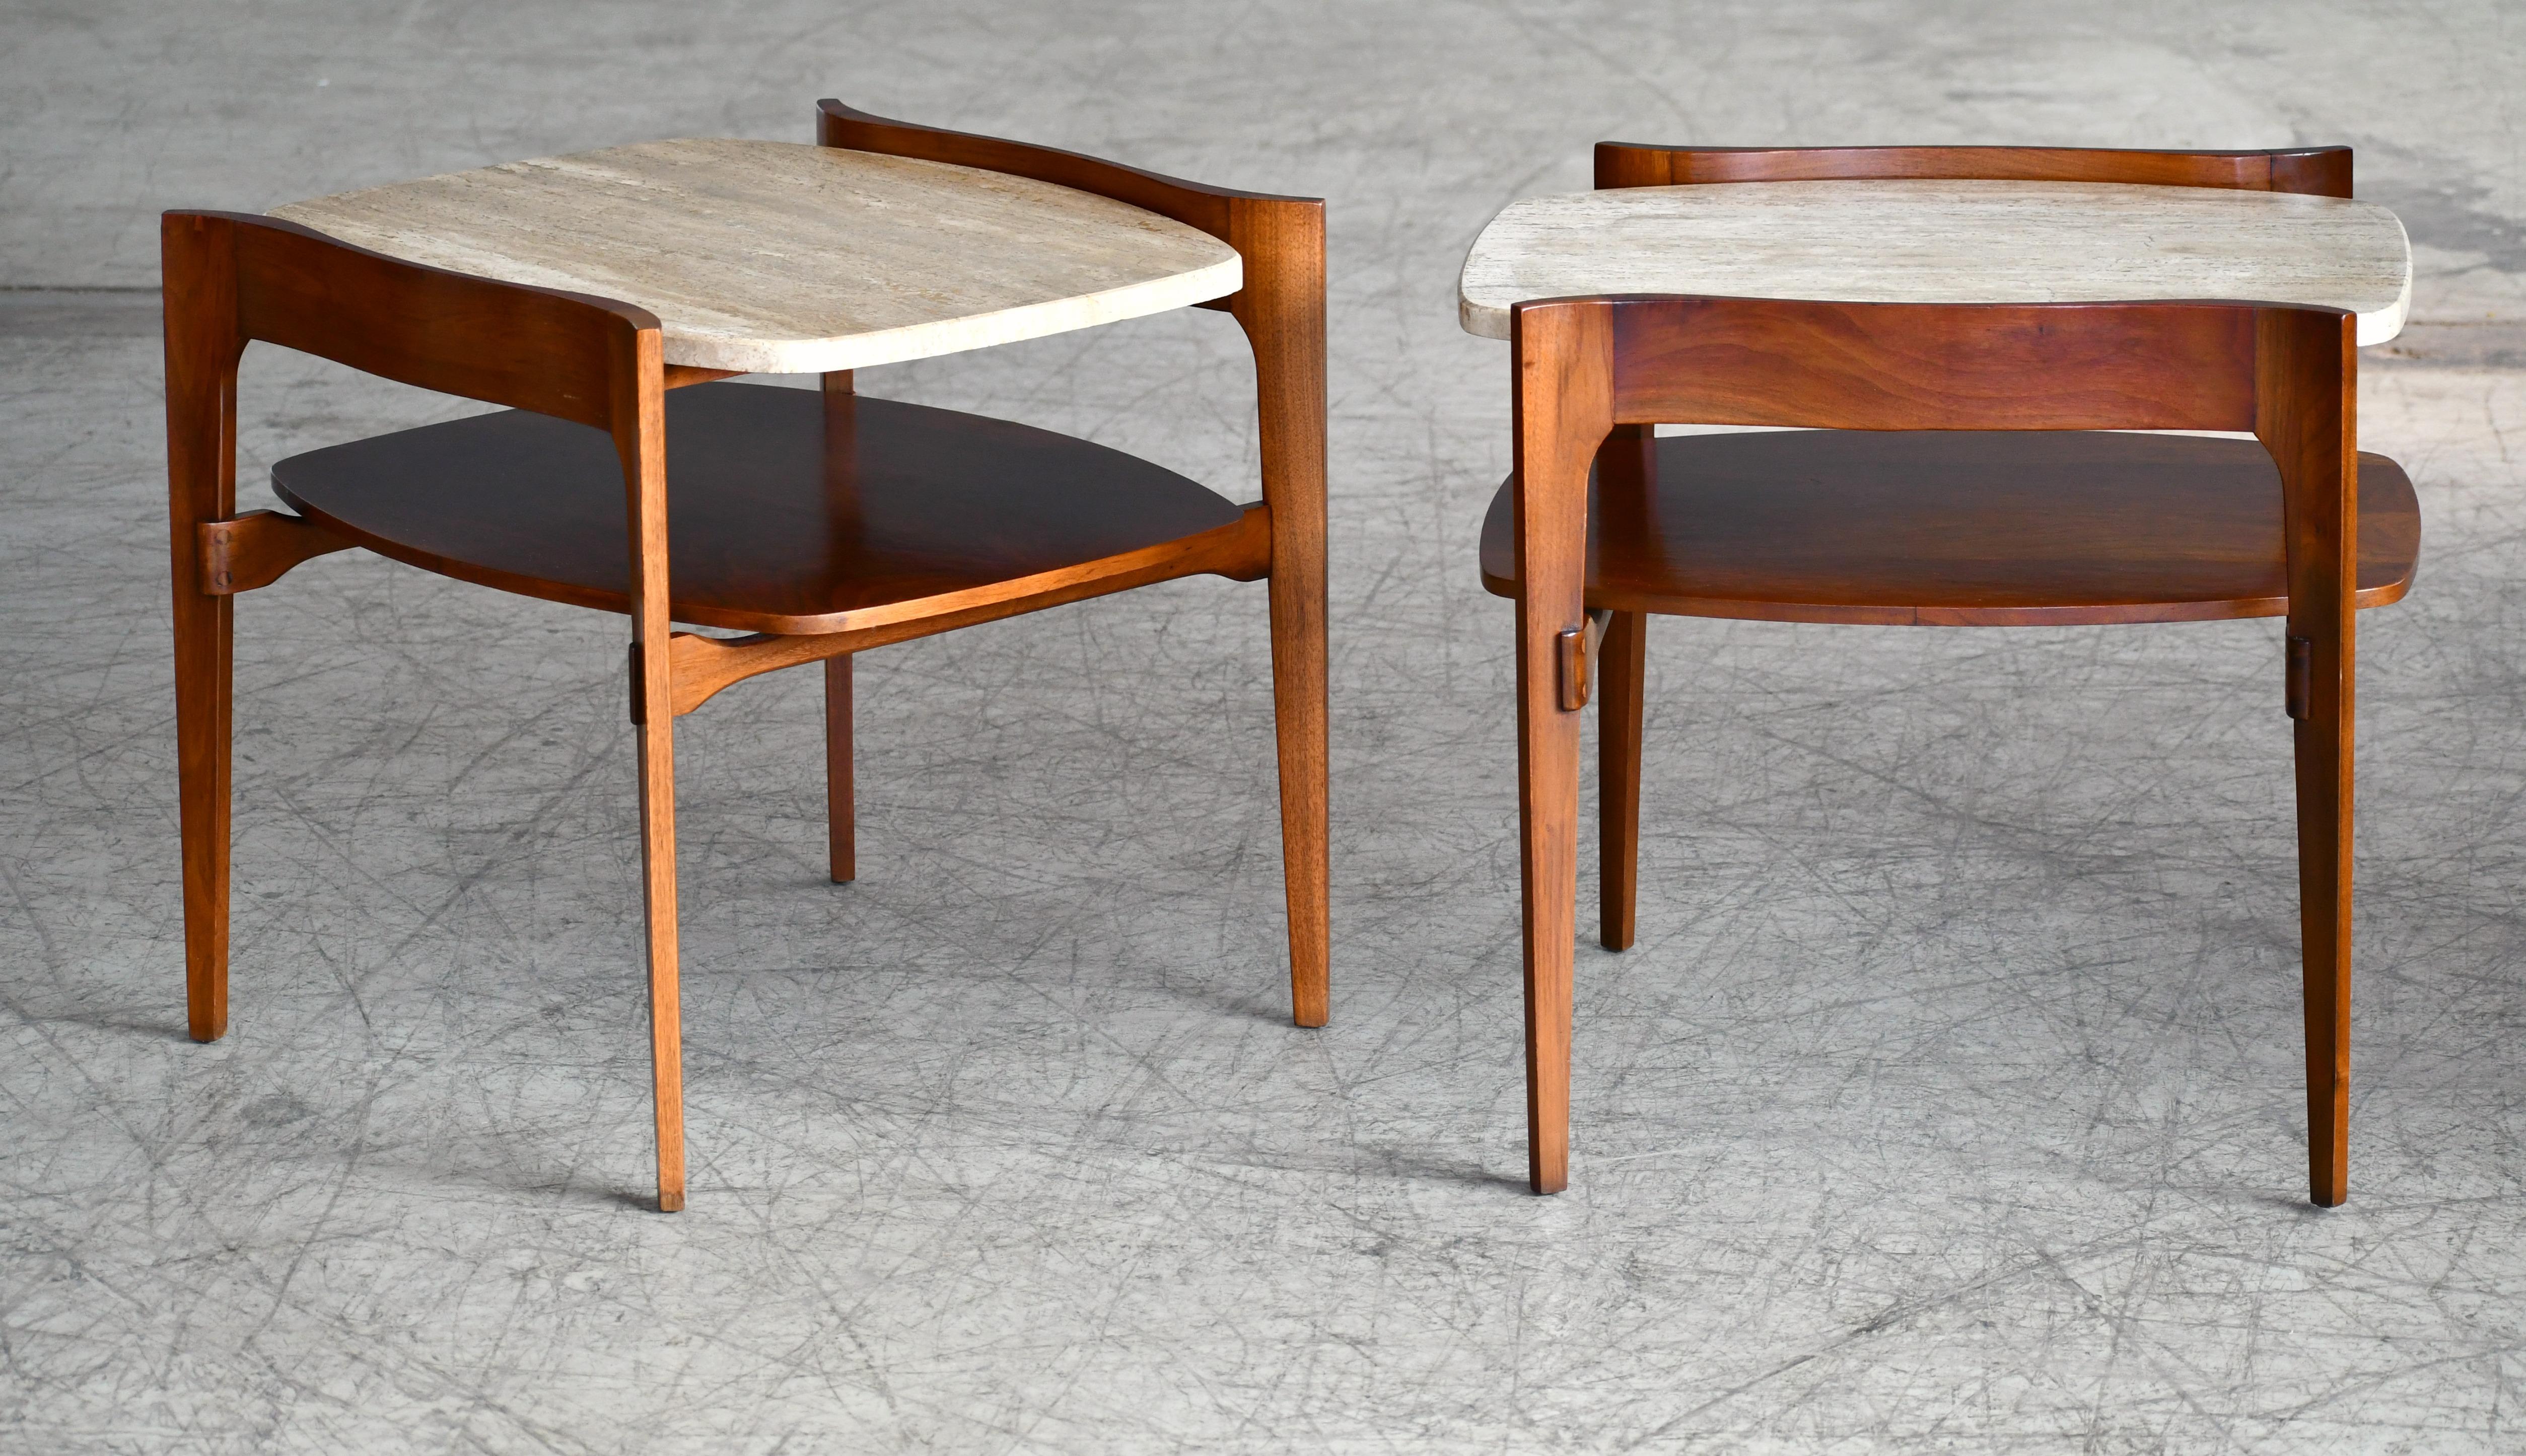 American Bertha Schaefer Midcentury End or Side Tables in Walnut with Travertine Tops